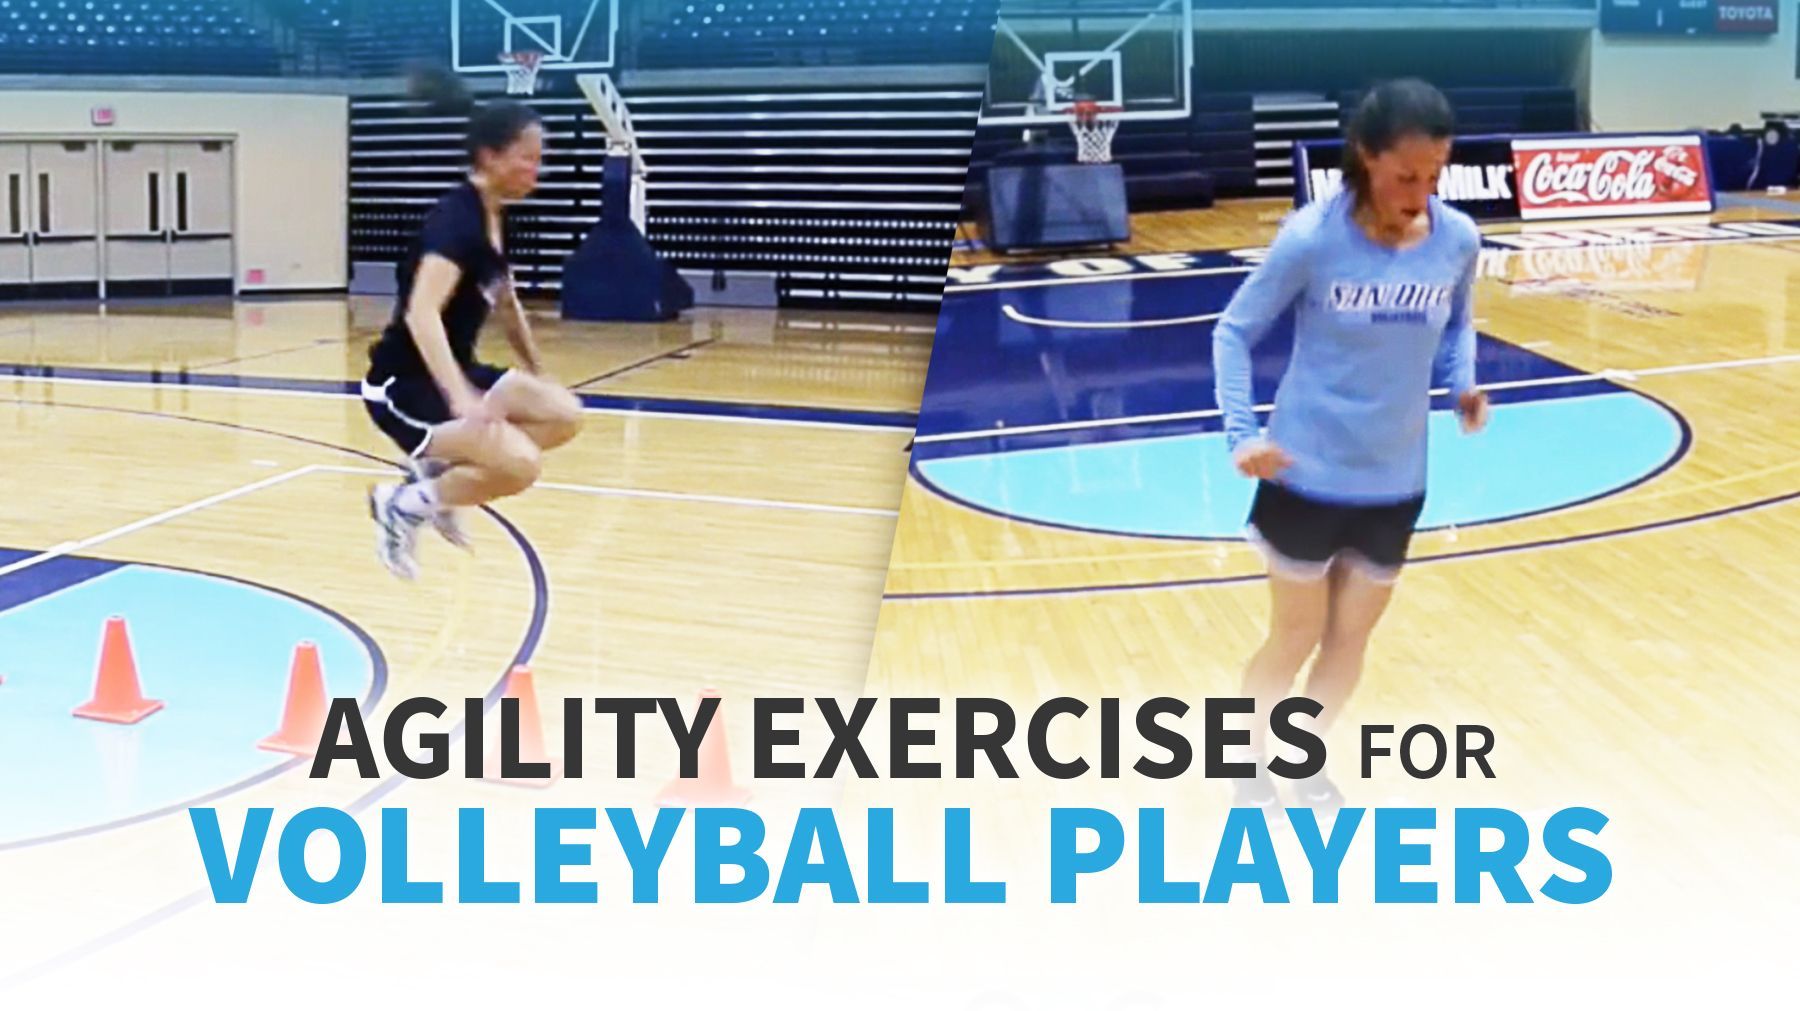 Agility exercises for volleyball players -   24 fitness at training
 ideas